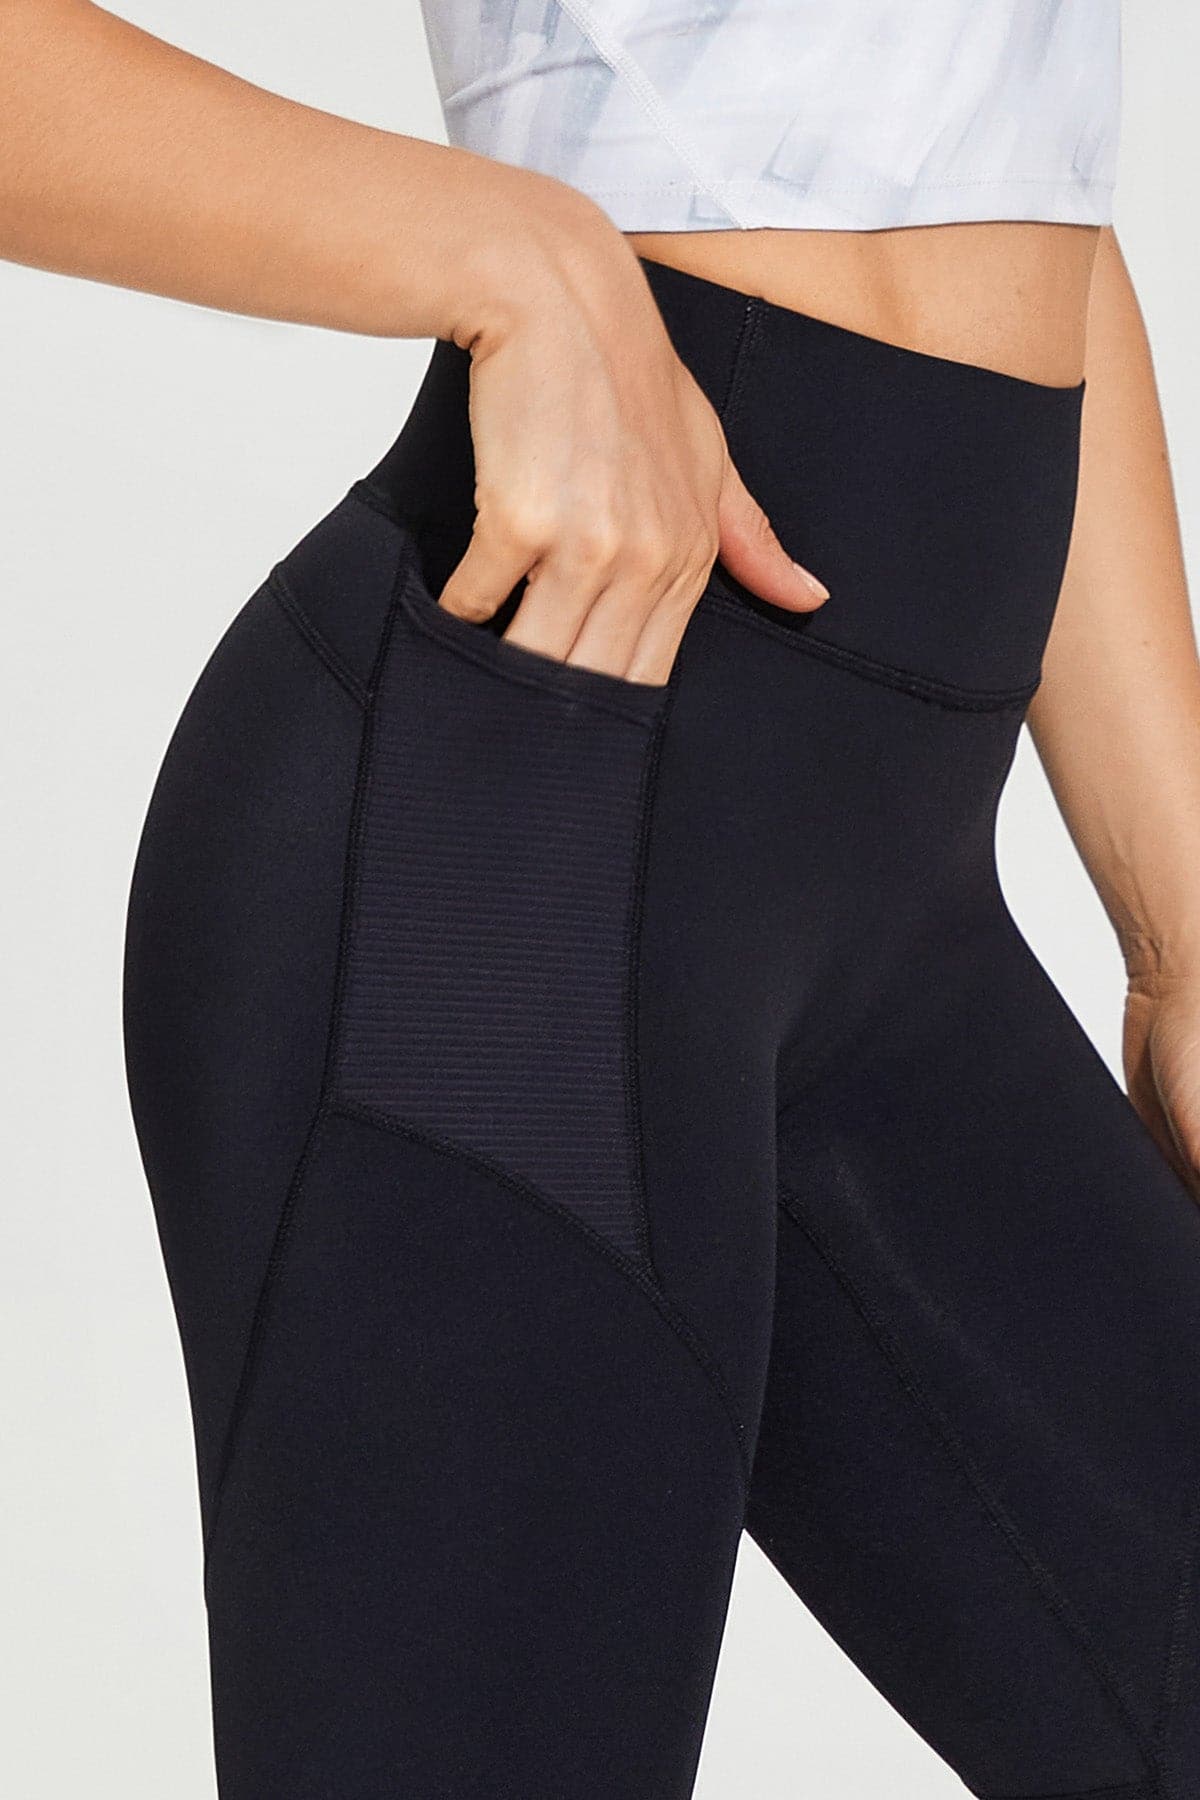 Pollypark ribbed yoga pants with pockets full length